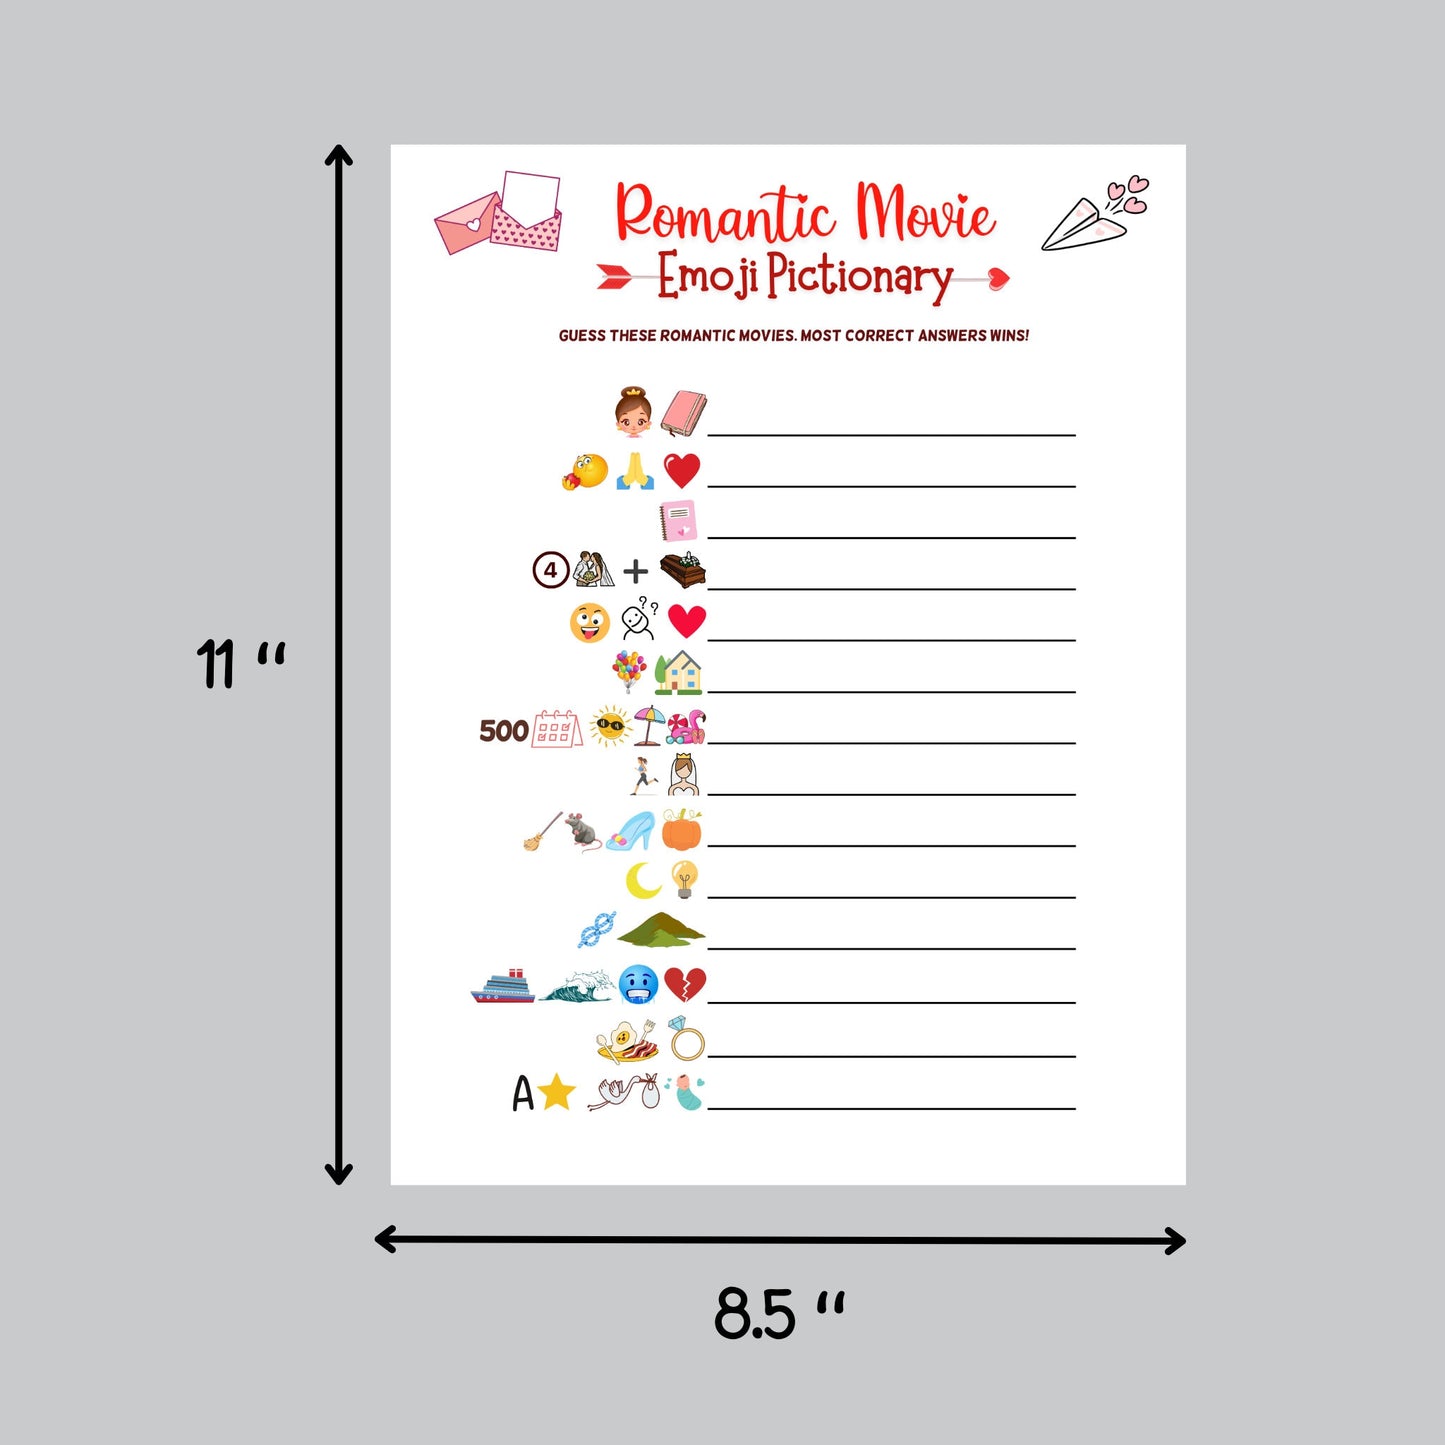 Valentine's Day Romantic Movie Emoji Pictionary Game Printable Activity, Fun Emoji Game Adults & Kids, Party Game, Galentines Day Games